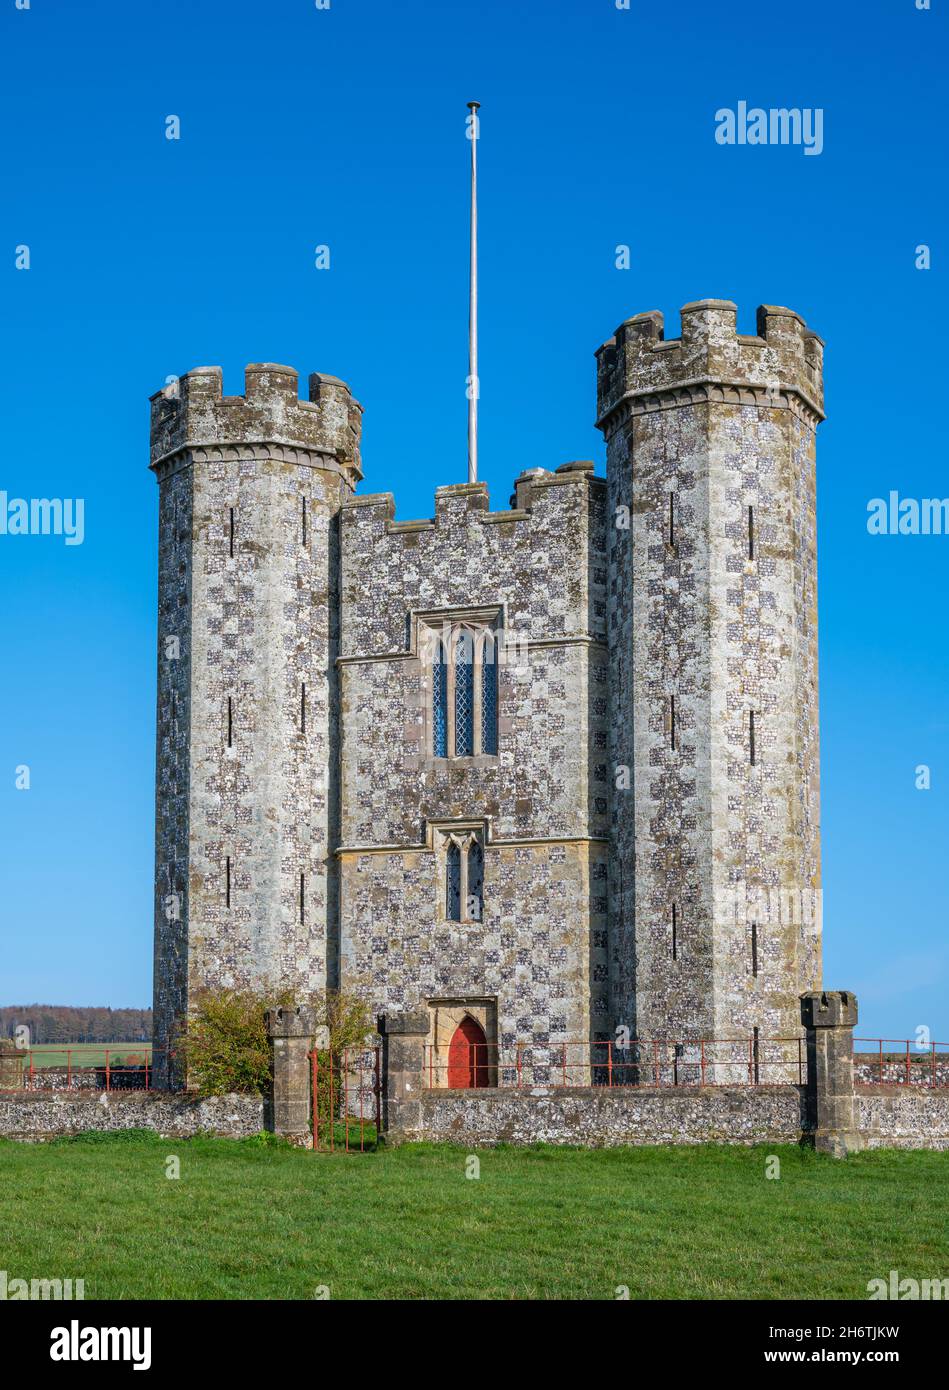 Hiorne Tower in Arundel Park, AKA Hiorne's Tower, an 18th century folly built by Sir Francis Hiorne located in Arundel Park, Arundel, West Sussex, UK. Stock Photo